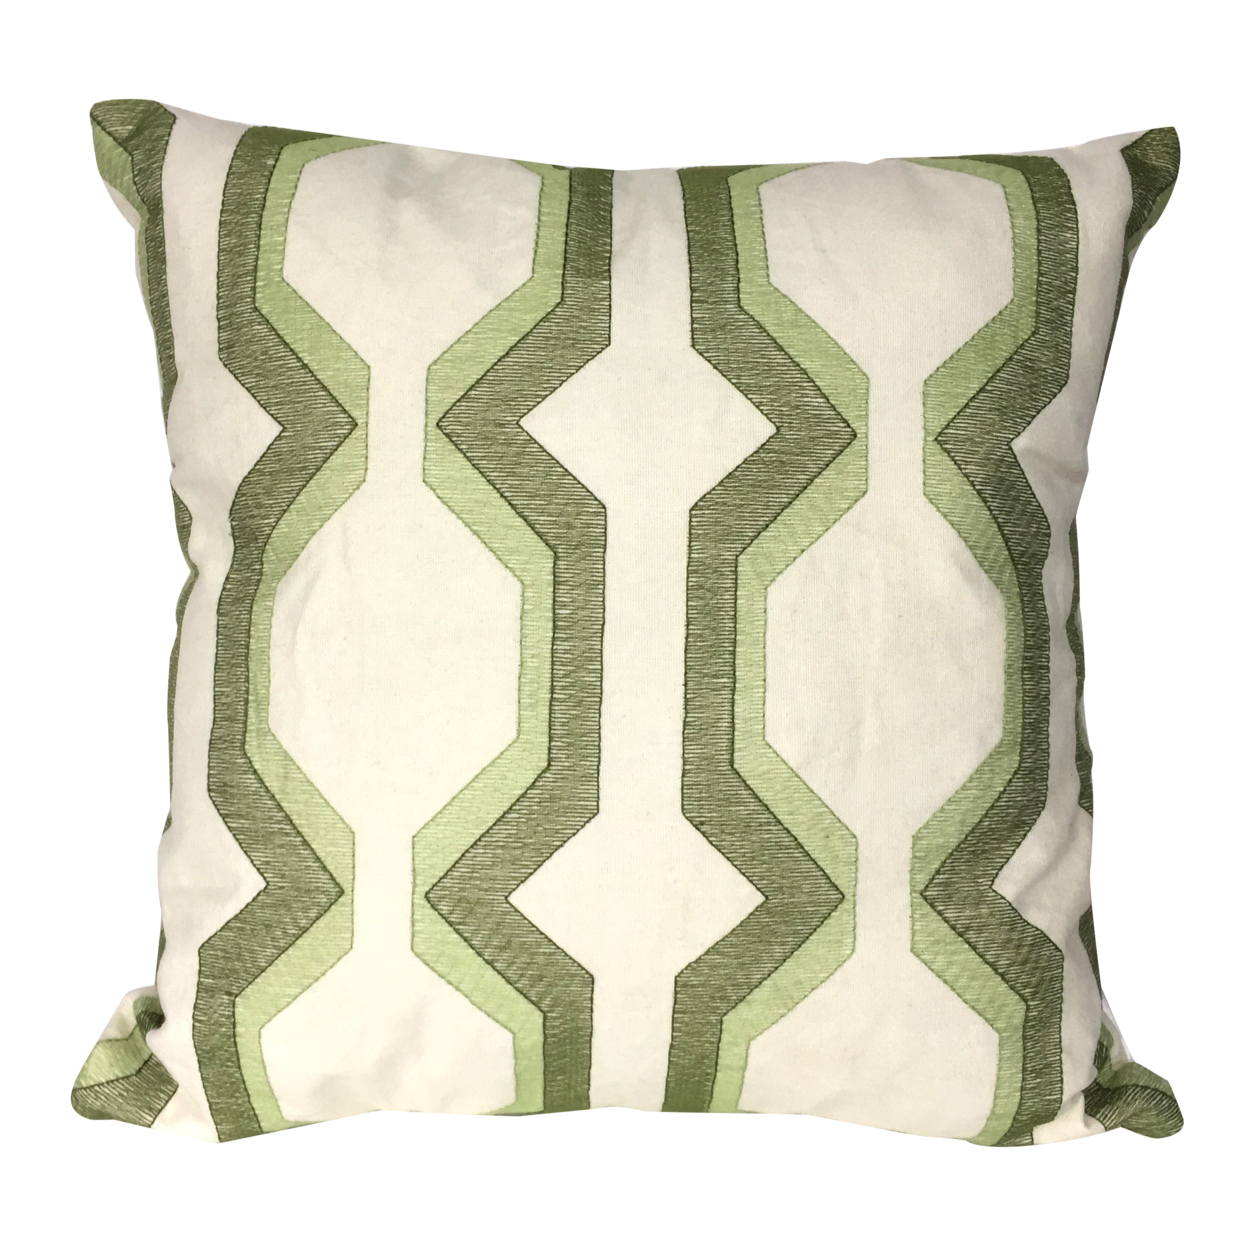 Contemporary Cotton Pillow With Geometric Embroidery, Green And White- Saltoro Sherpi